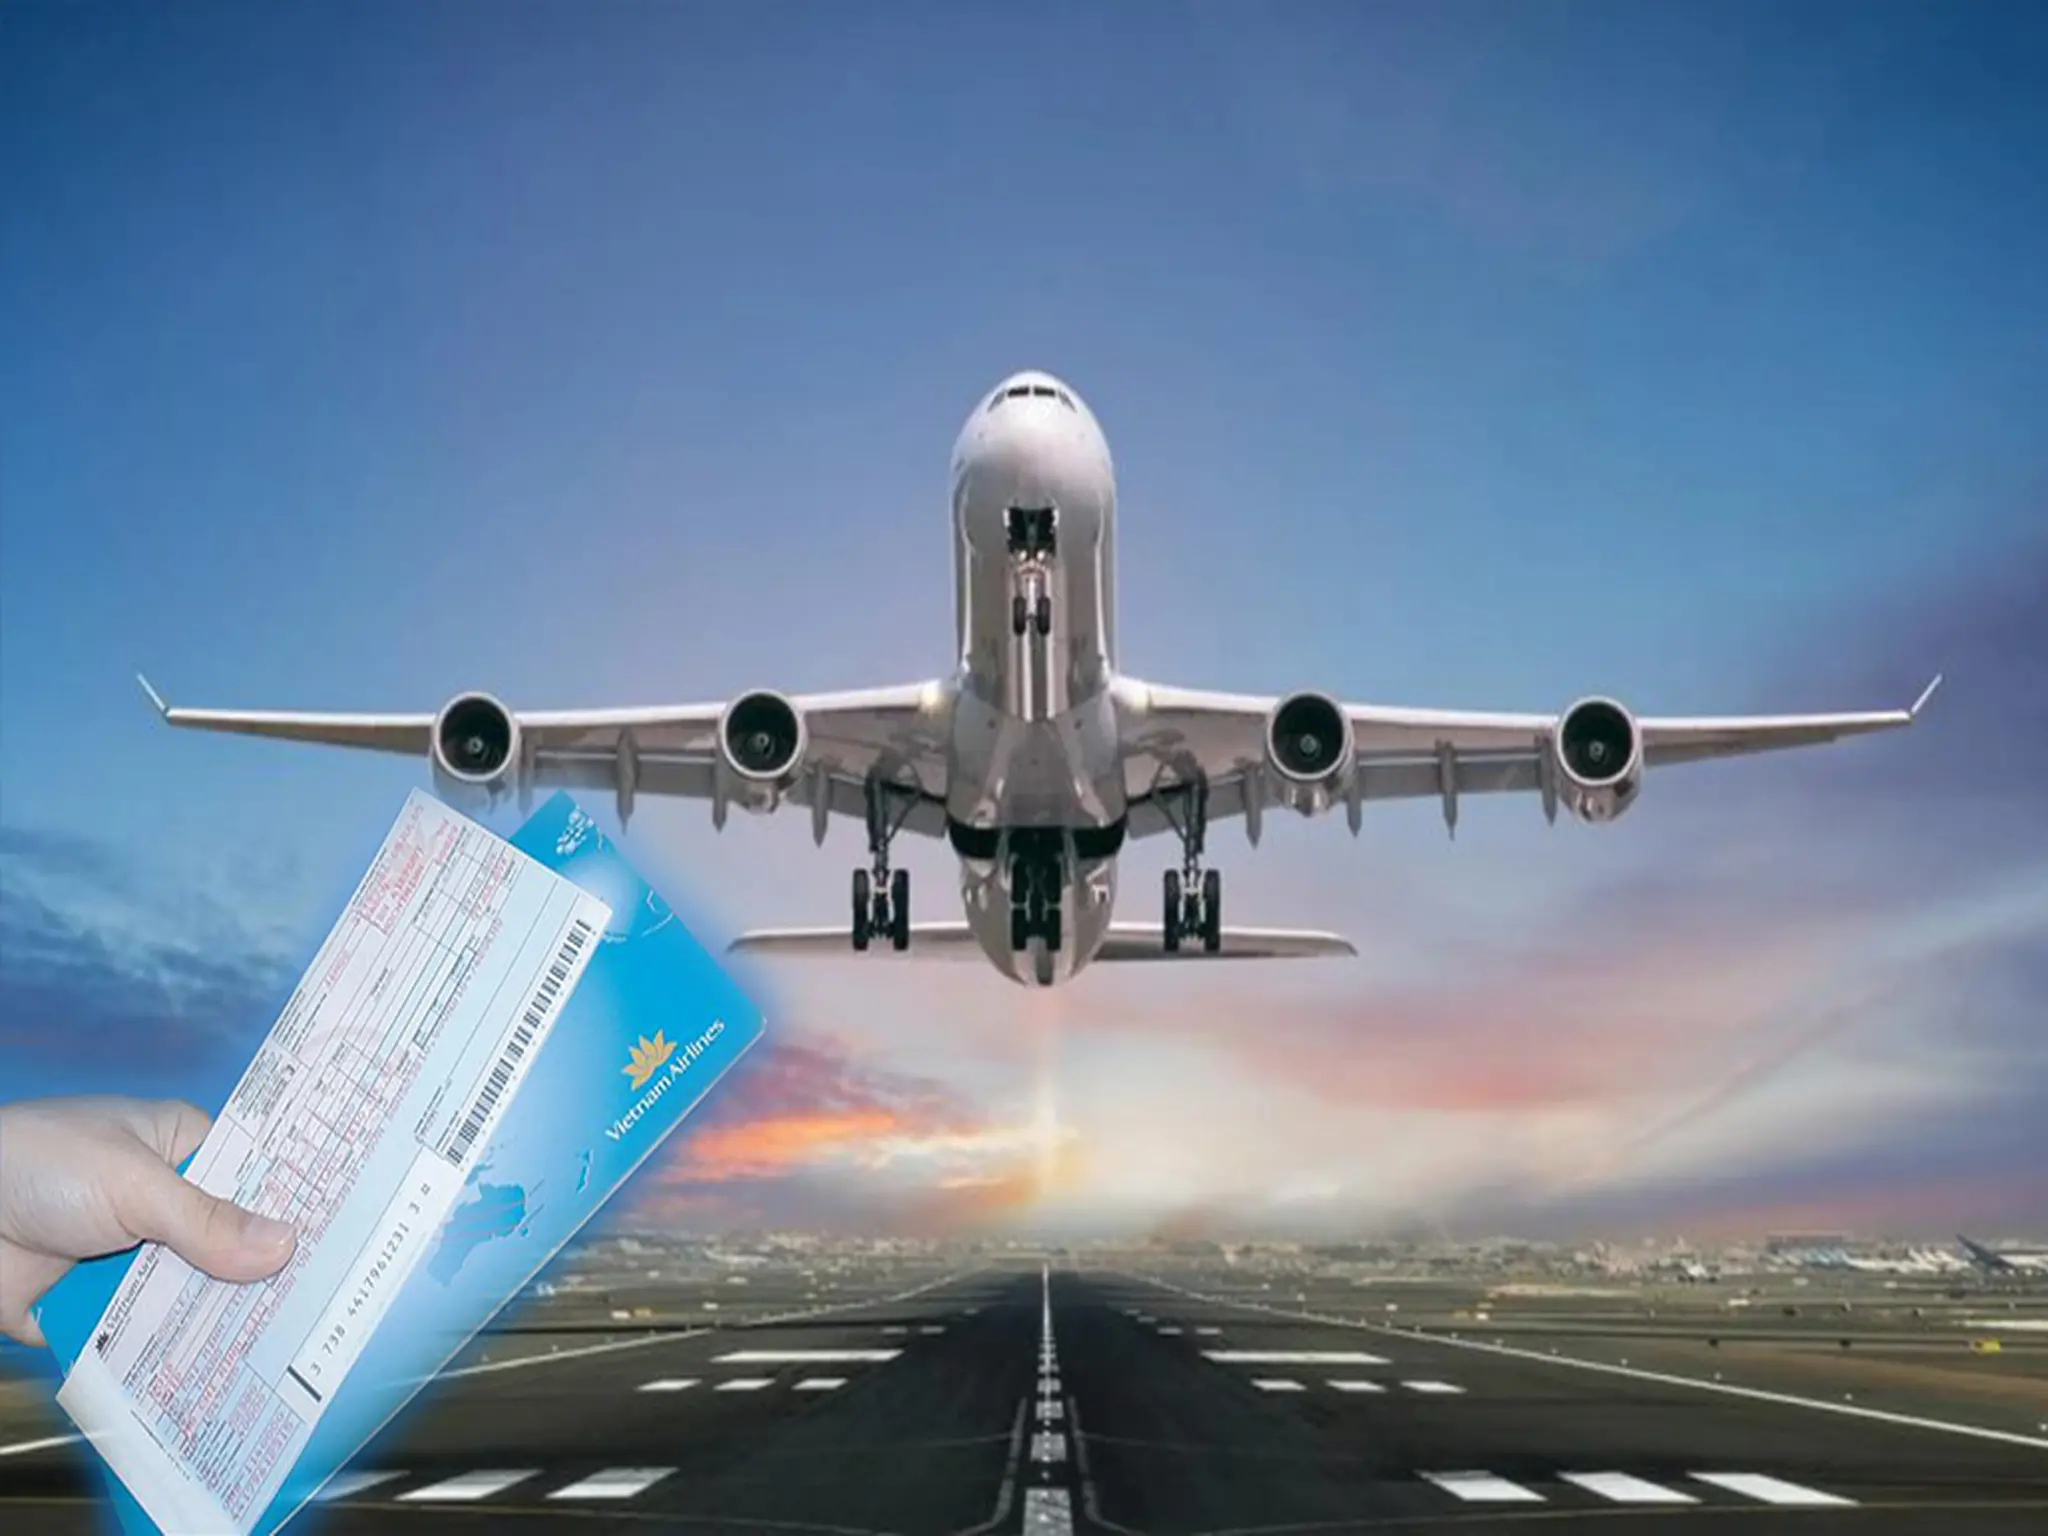 Announcing a 25% discount on booking international airline tickets for a period of two weeks